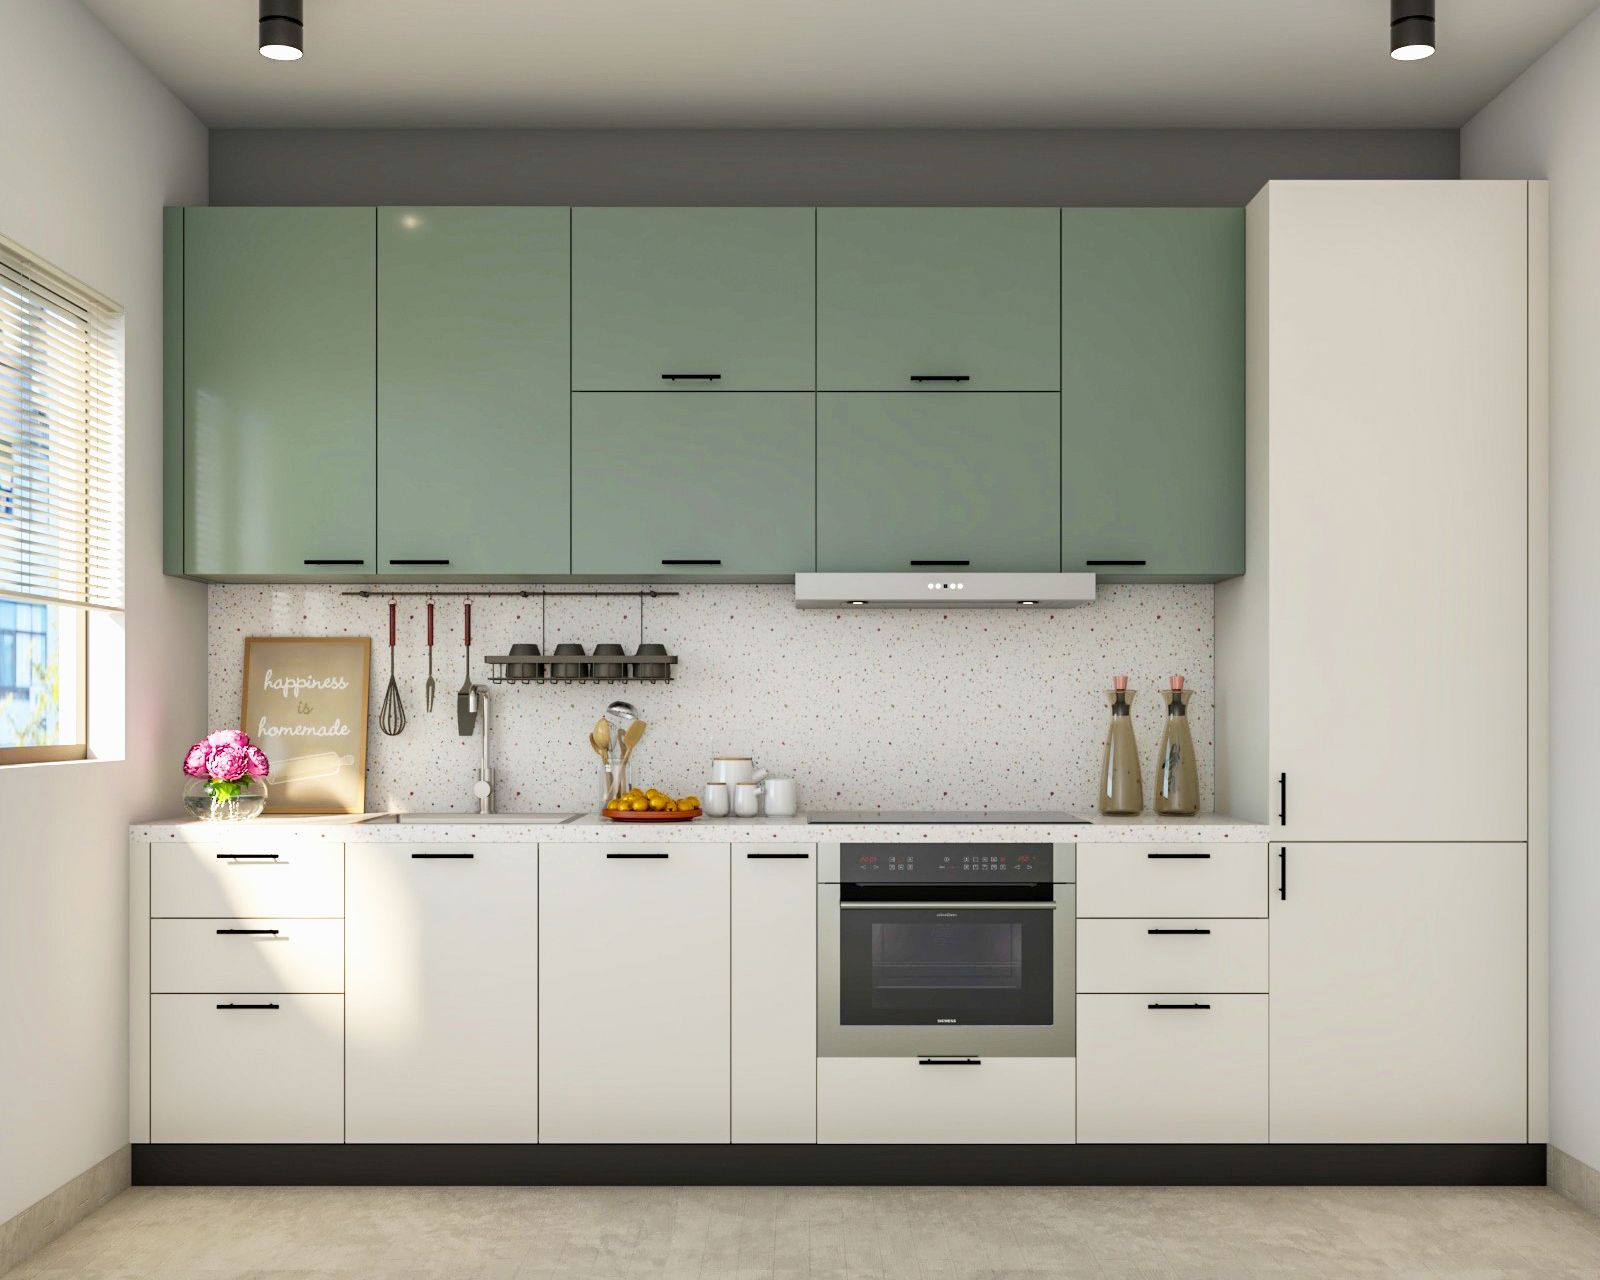 Modern Modular Open Kitchen Design With Green And White Cabinets